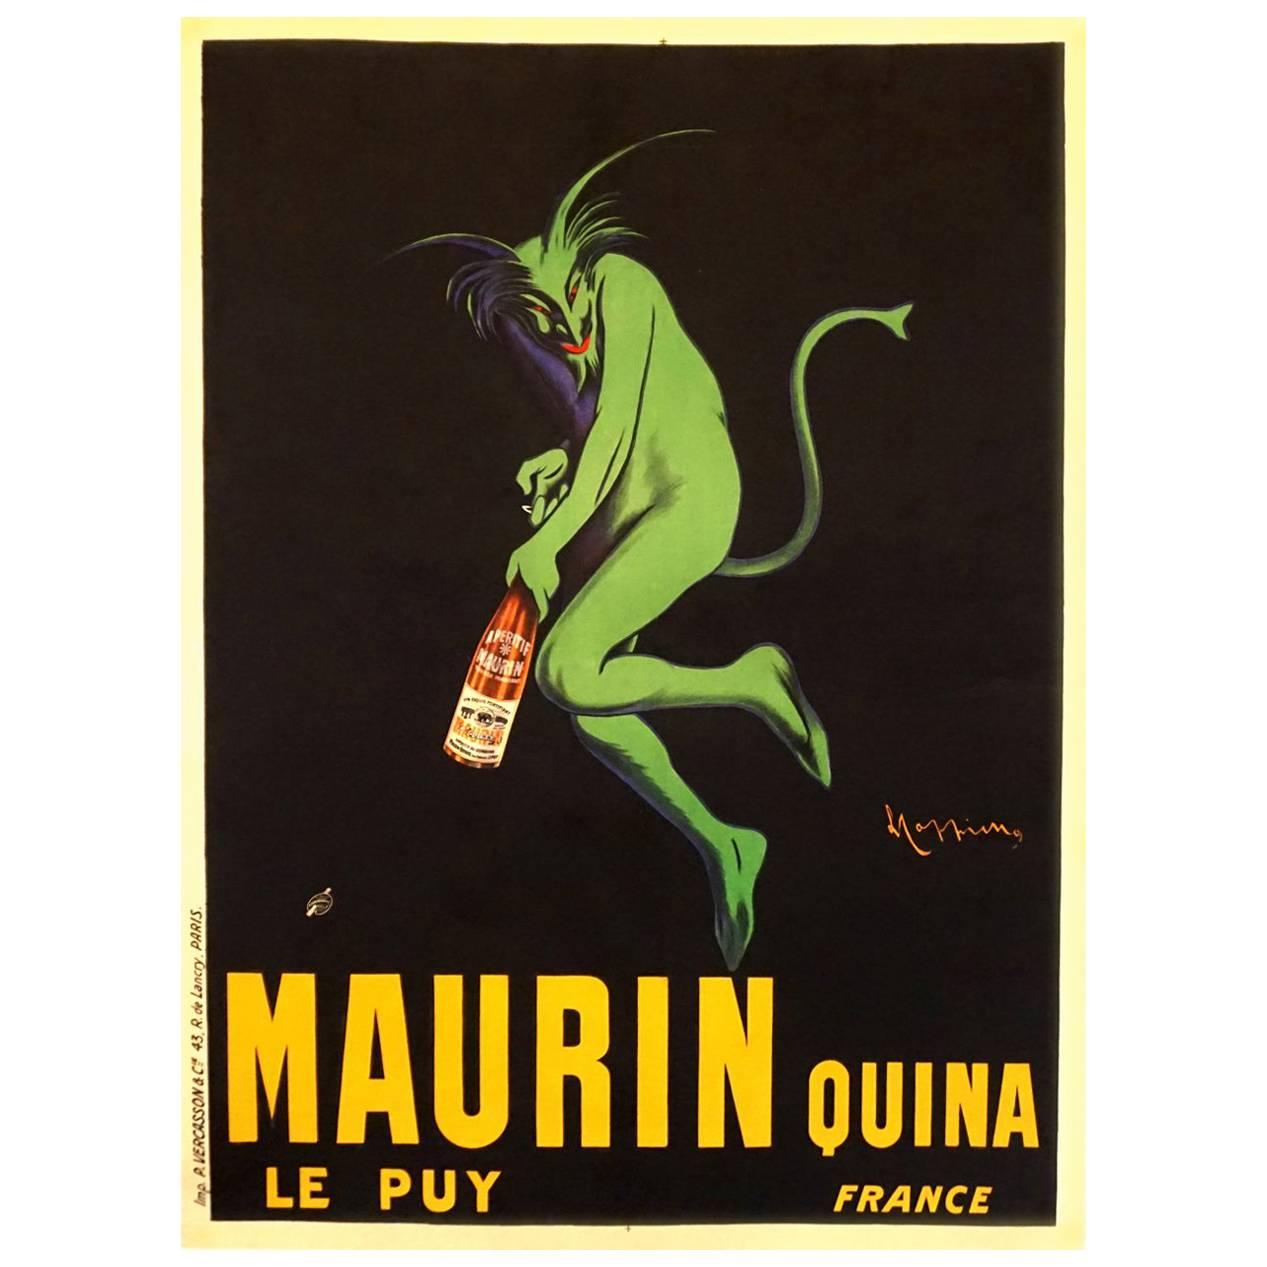 French Art Deco Liquor Advertising Poster 'Maurin Quina' by Cappiello, 1906 For Sale